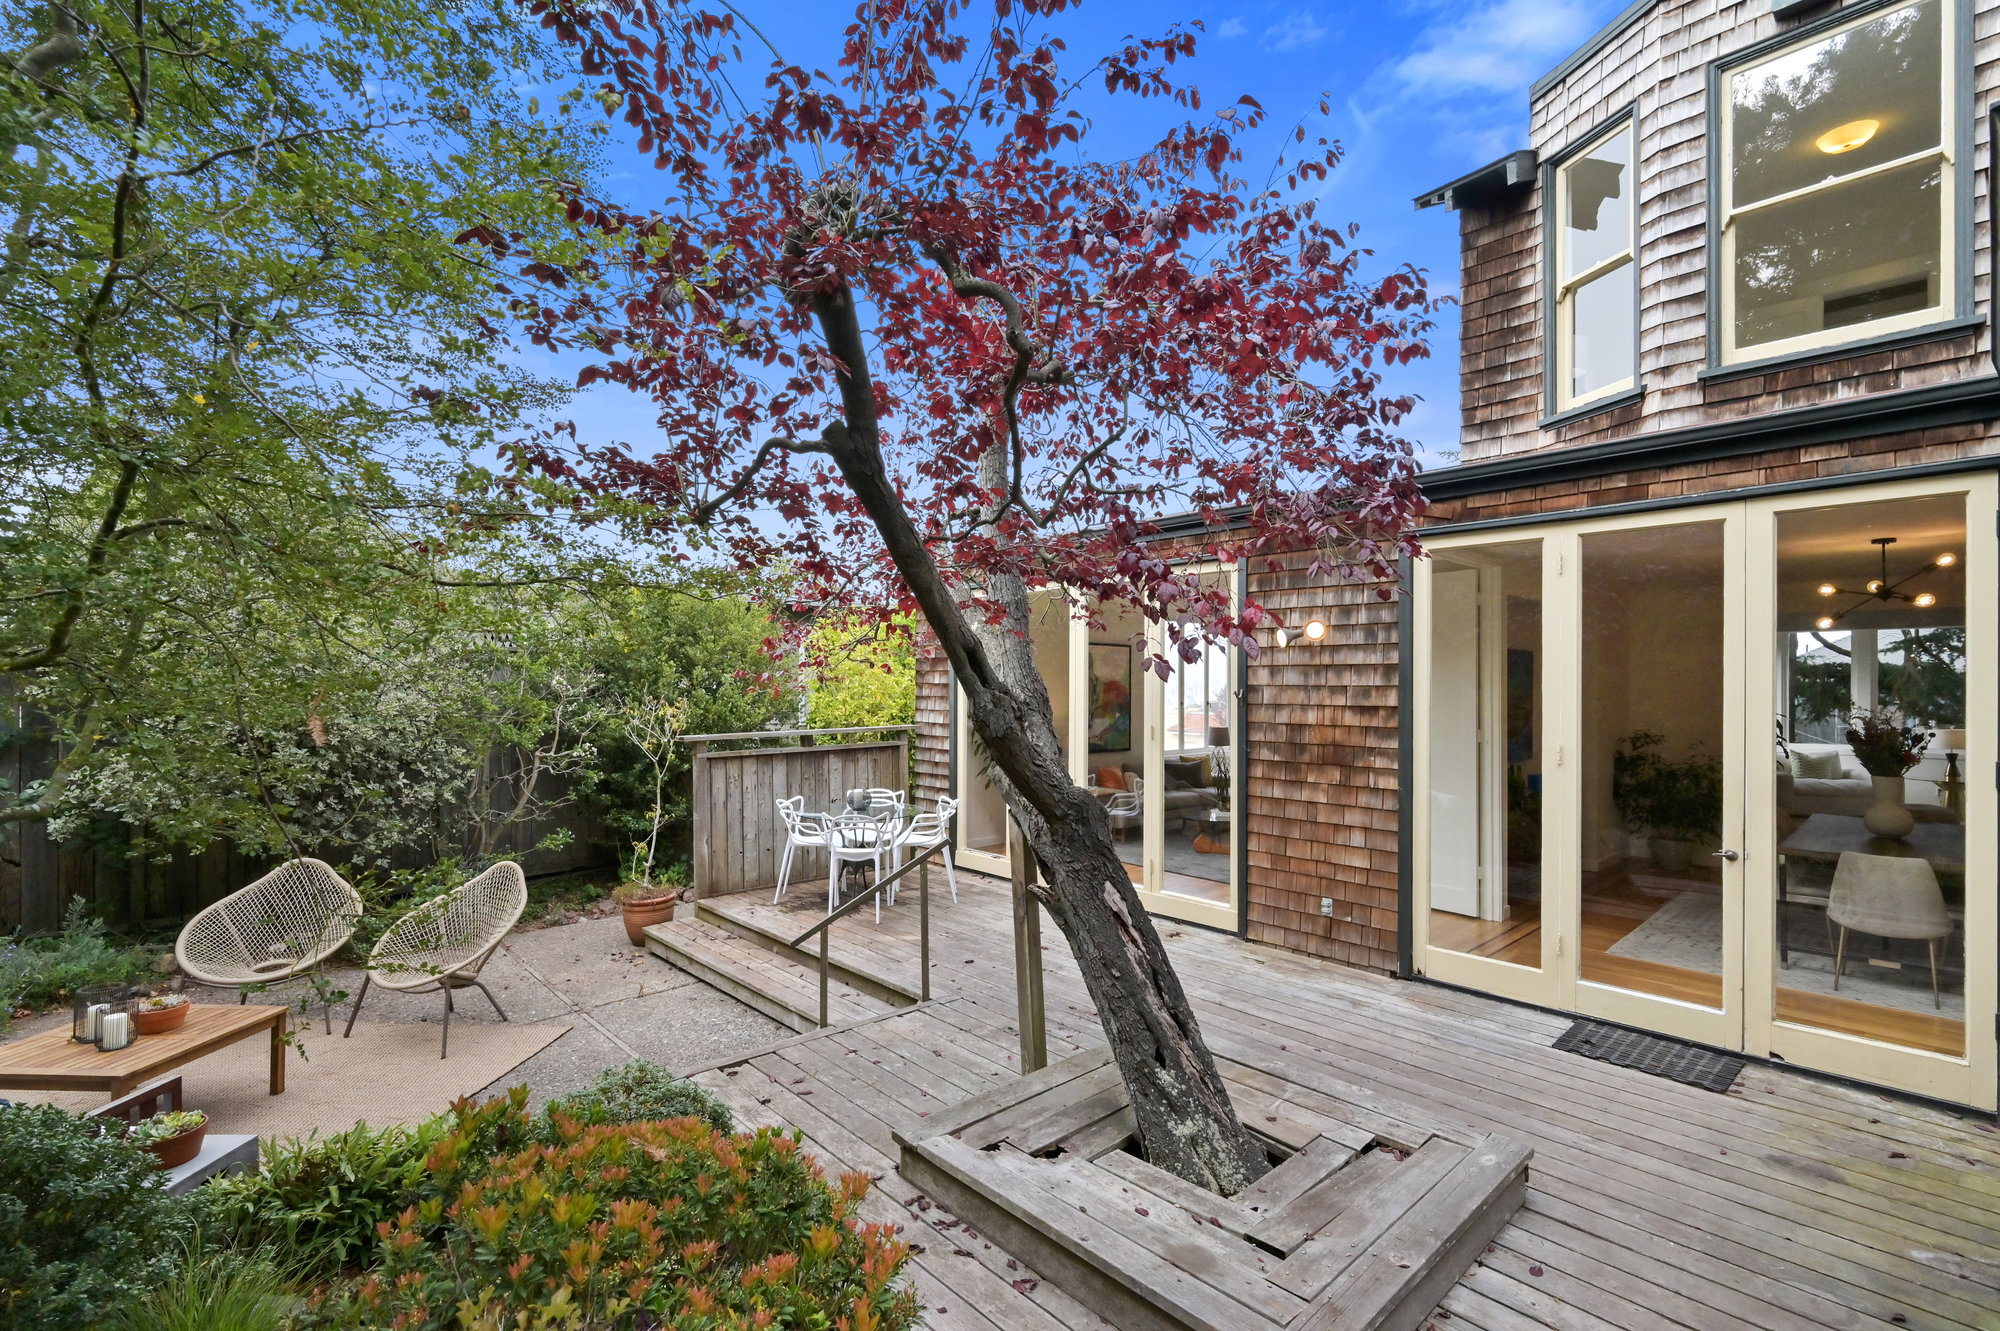 Property Photo: View of the wood deck at 183 Edgewood Avenue, showing an outdoor living area